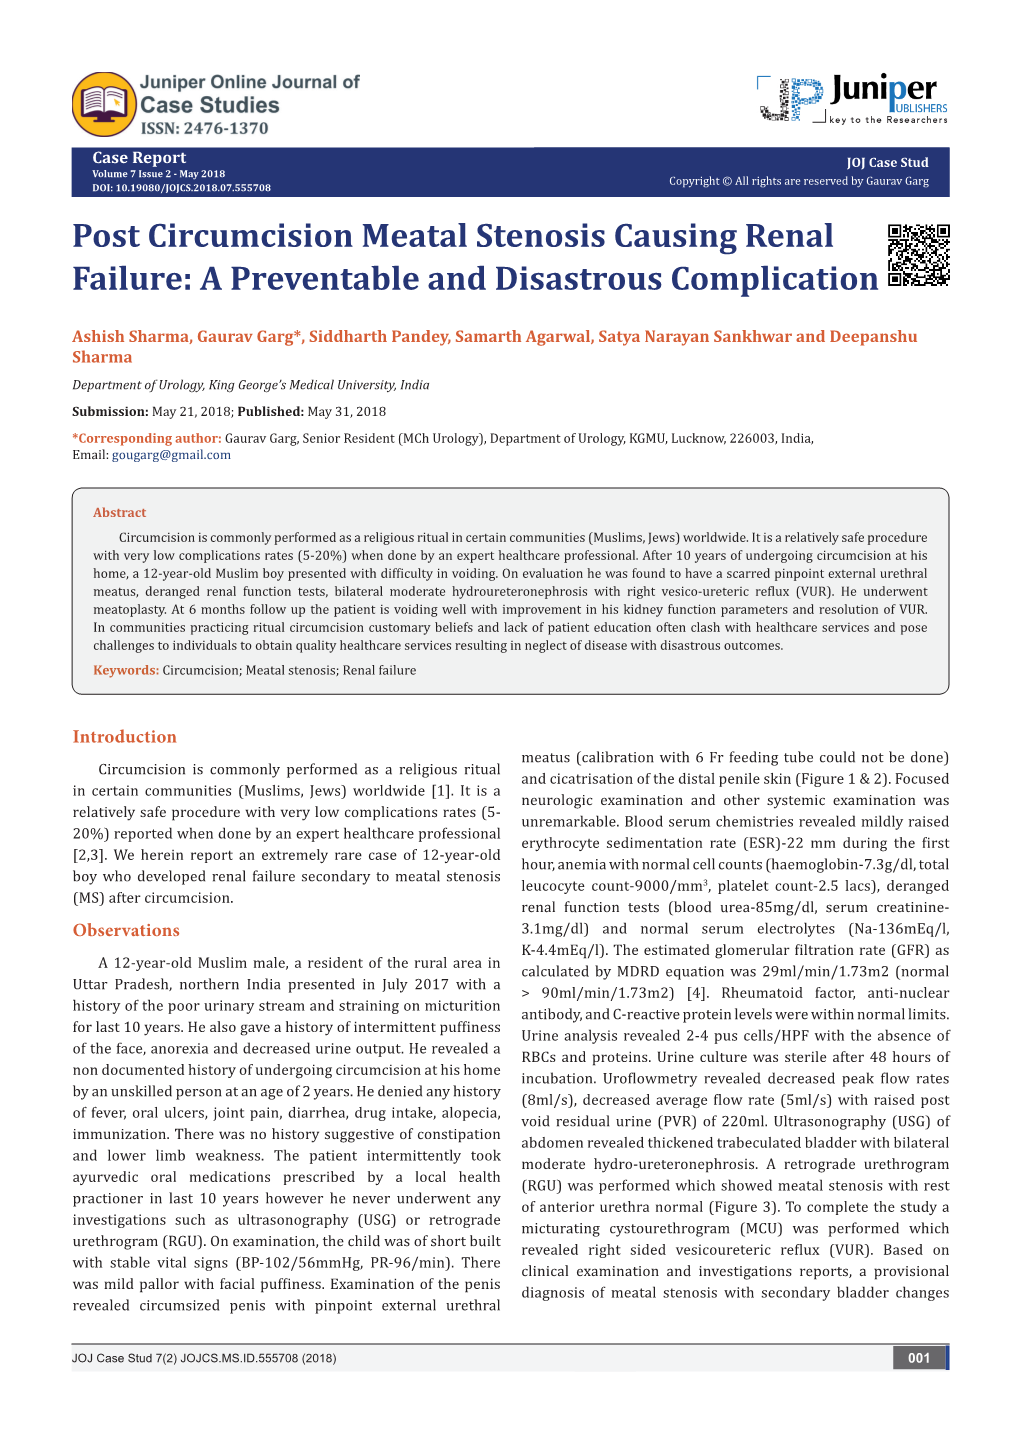 Post Circumcision Meatal Stenosis Causing Renal Failure: a Preventable and Disastrous Complication